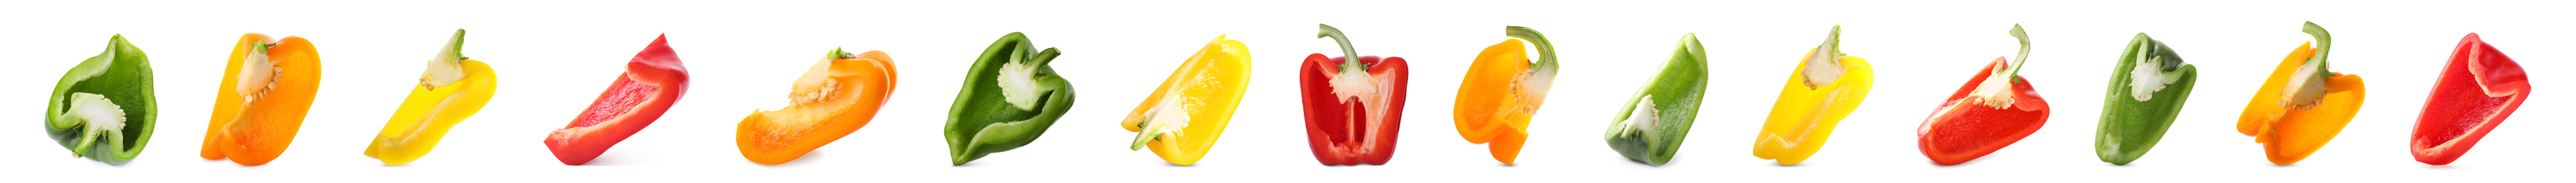 Set of different cut bell peppers on white background. Banner design 